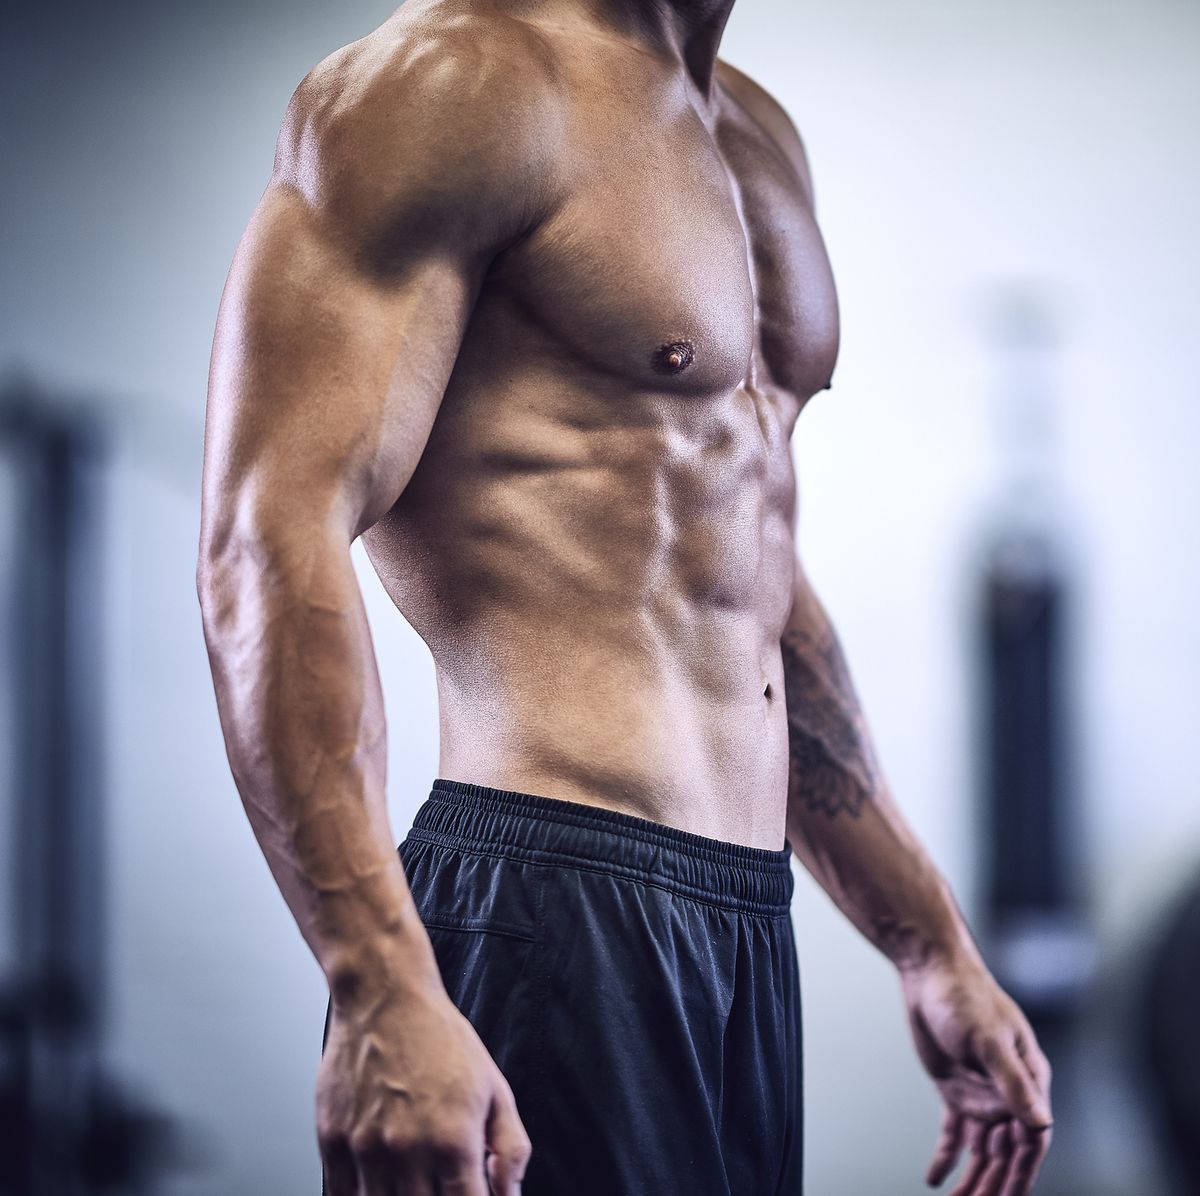 Best Chest Exercises For Chiseled Pecs